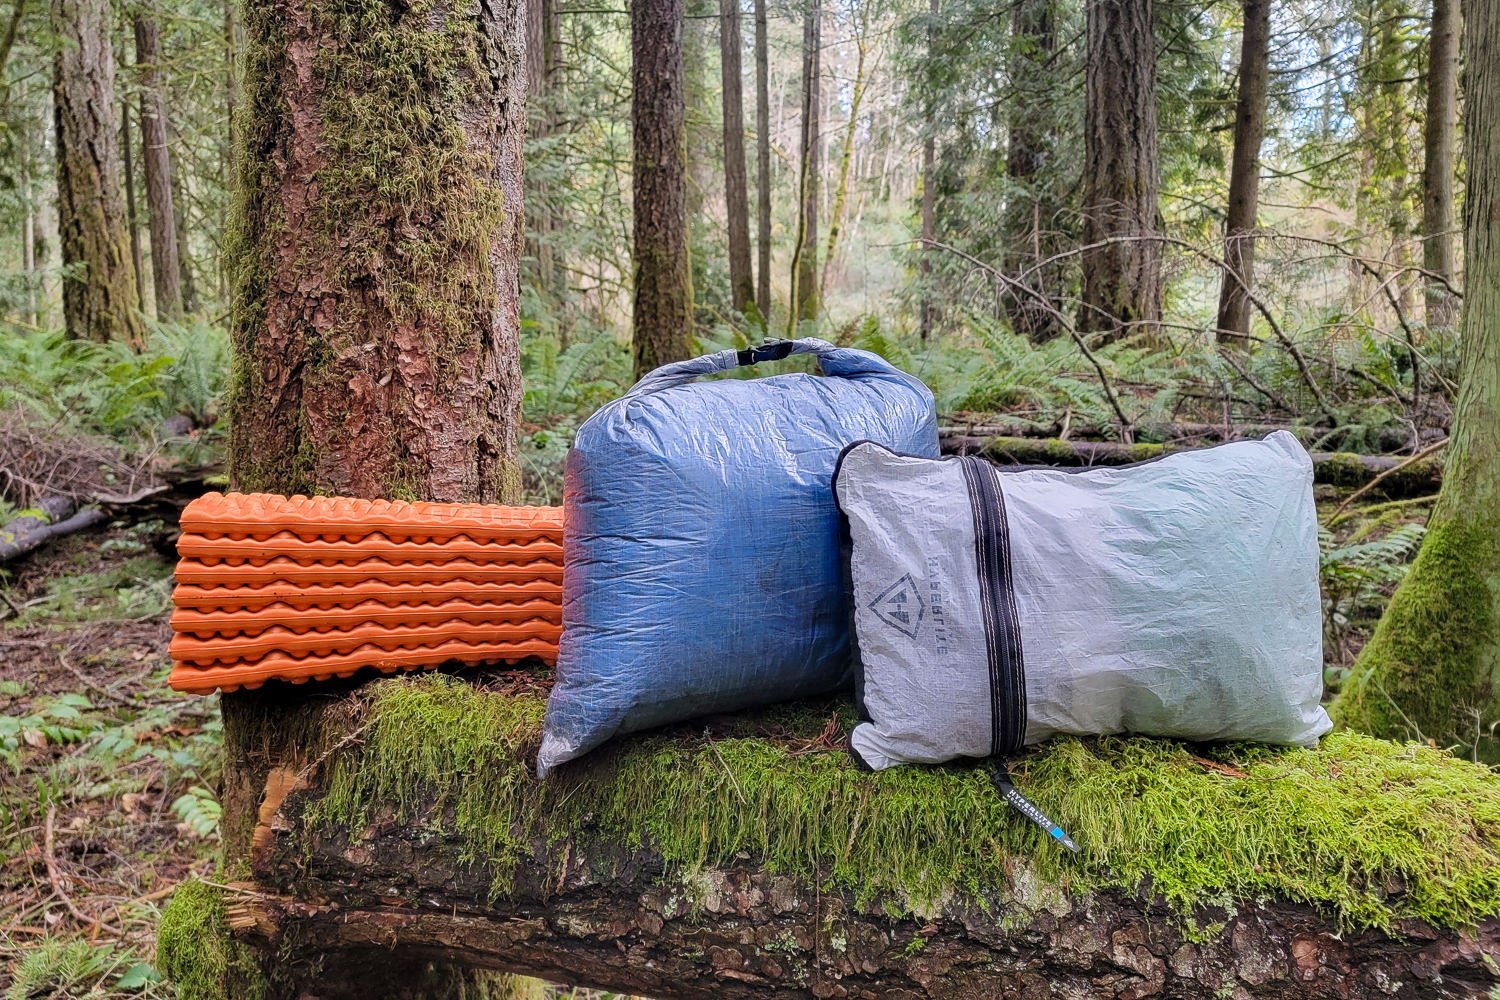 Closeup of the Zpacks Mummy Bag in its stuff sack with a backpacking pillow and sleeping pad